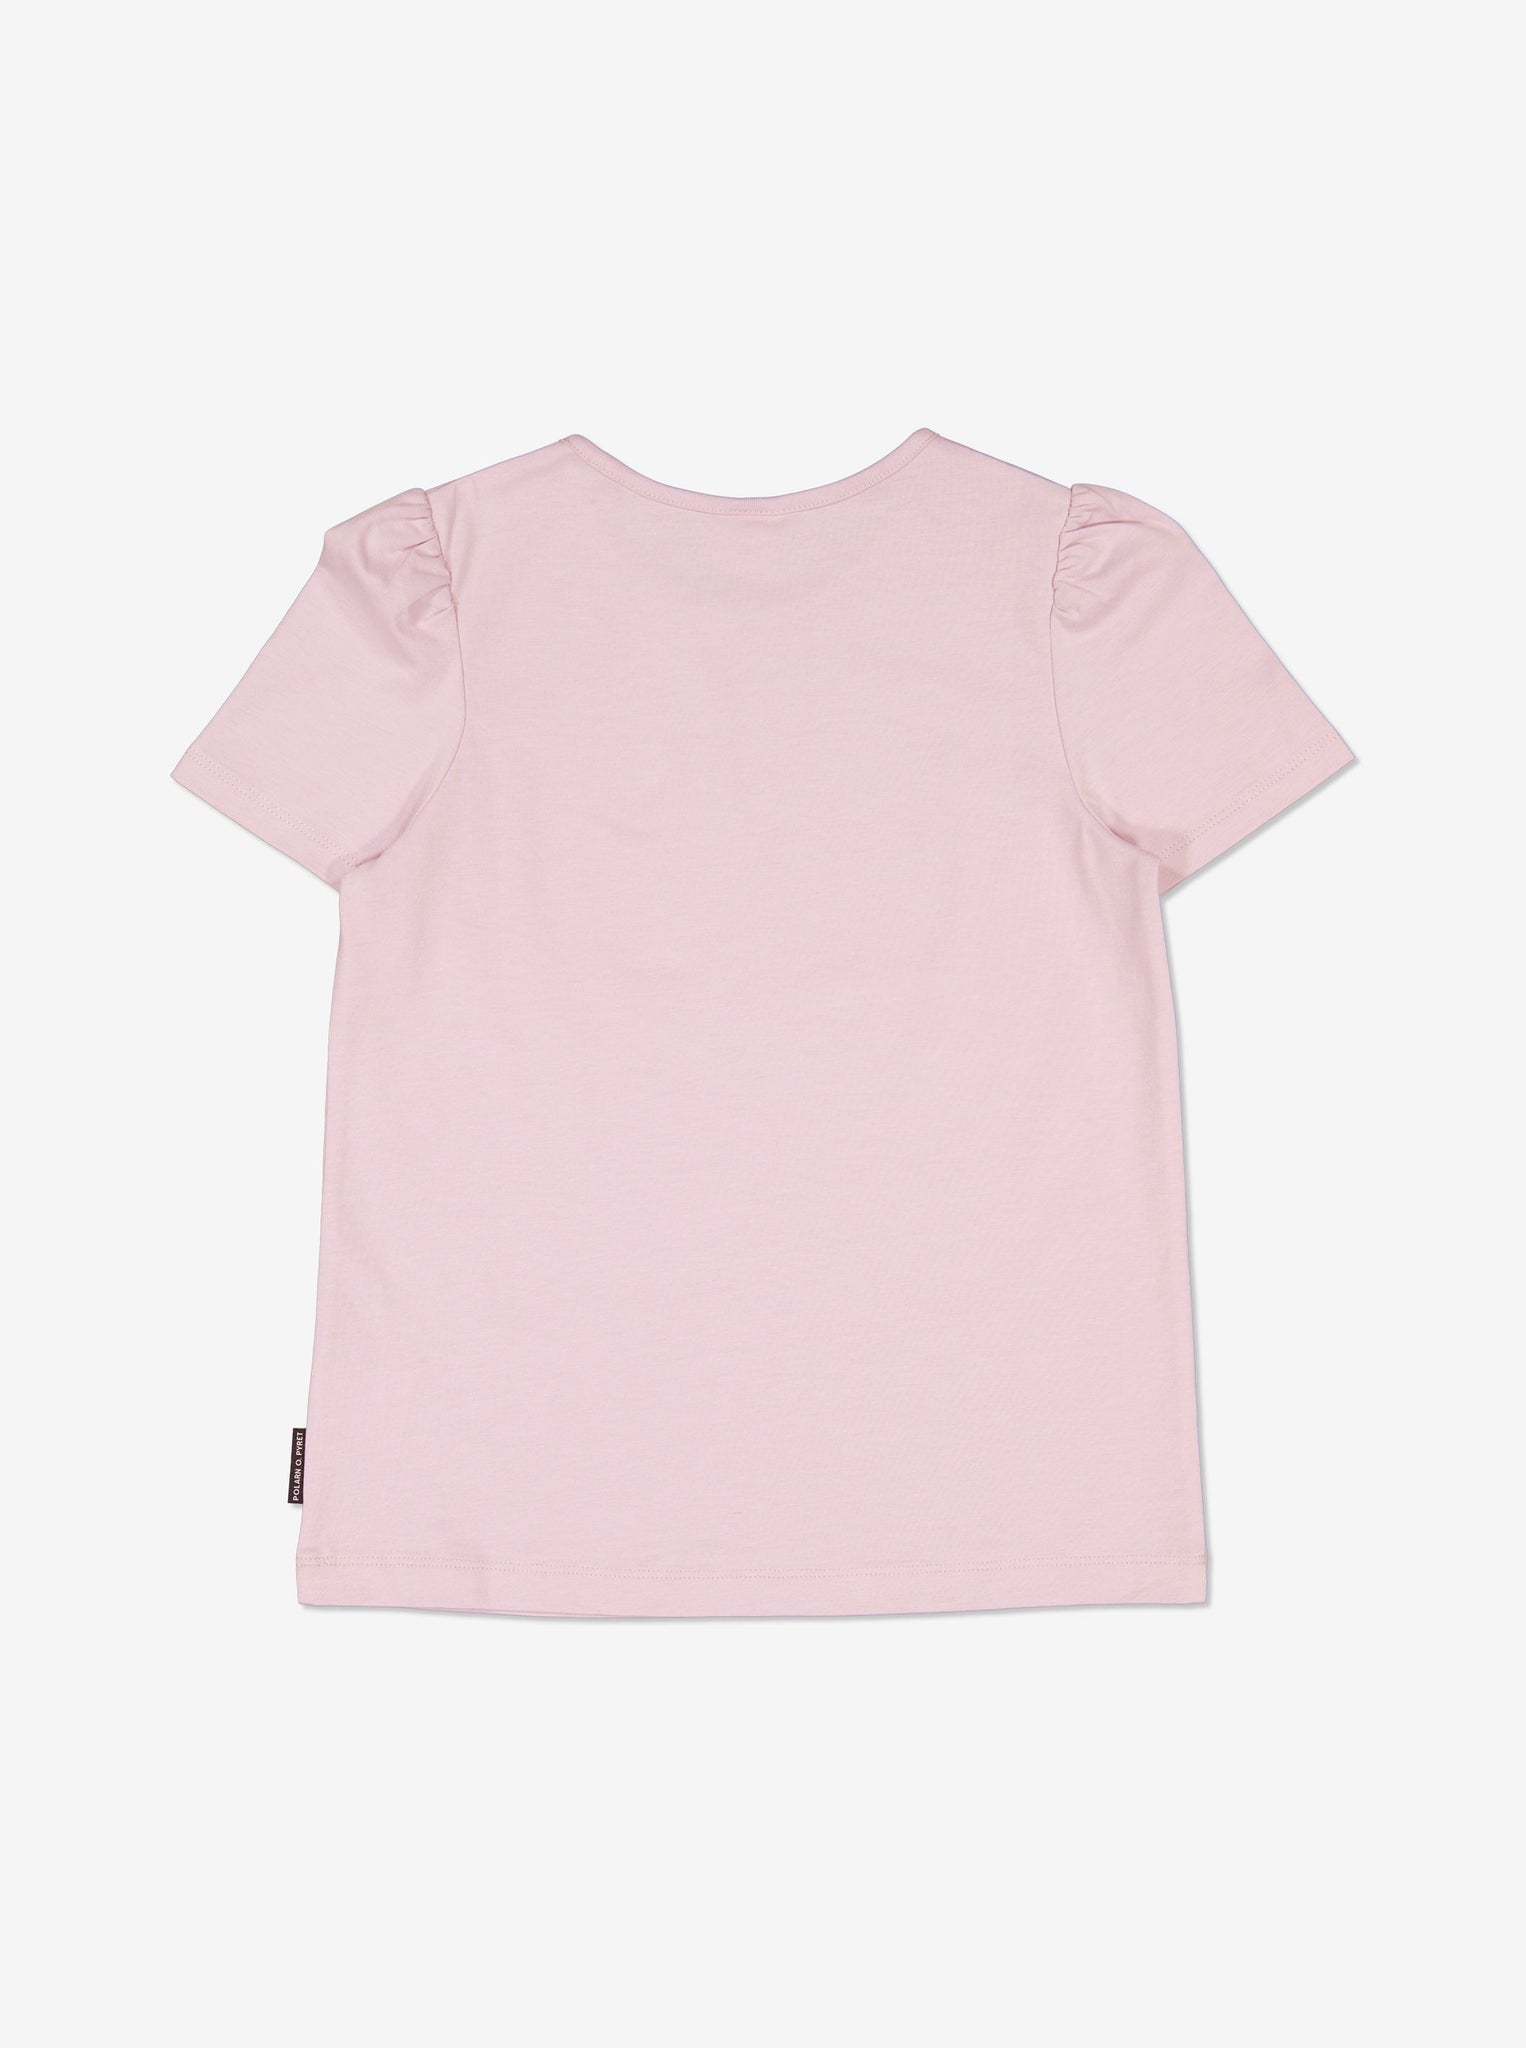  Puffed Sleeve Purple Girls Top from Polarn O. Pyret Kidswear. Made using ethically sourced materials.